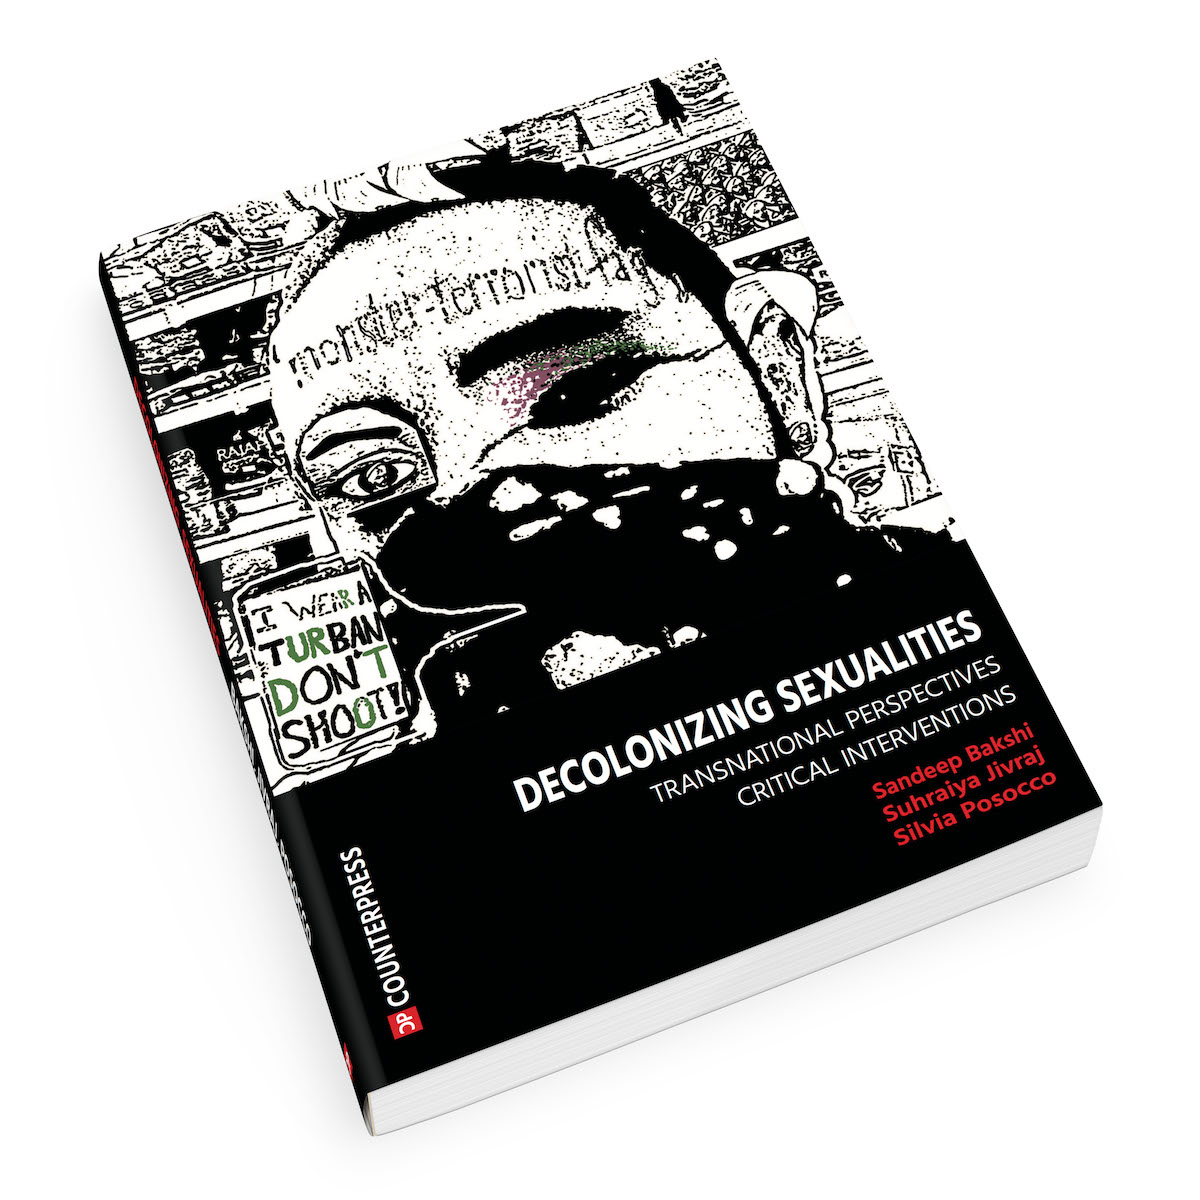 Decolonizing Sexualities: Foreword by Walter Mignolo